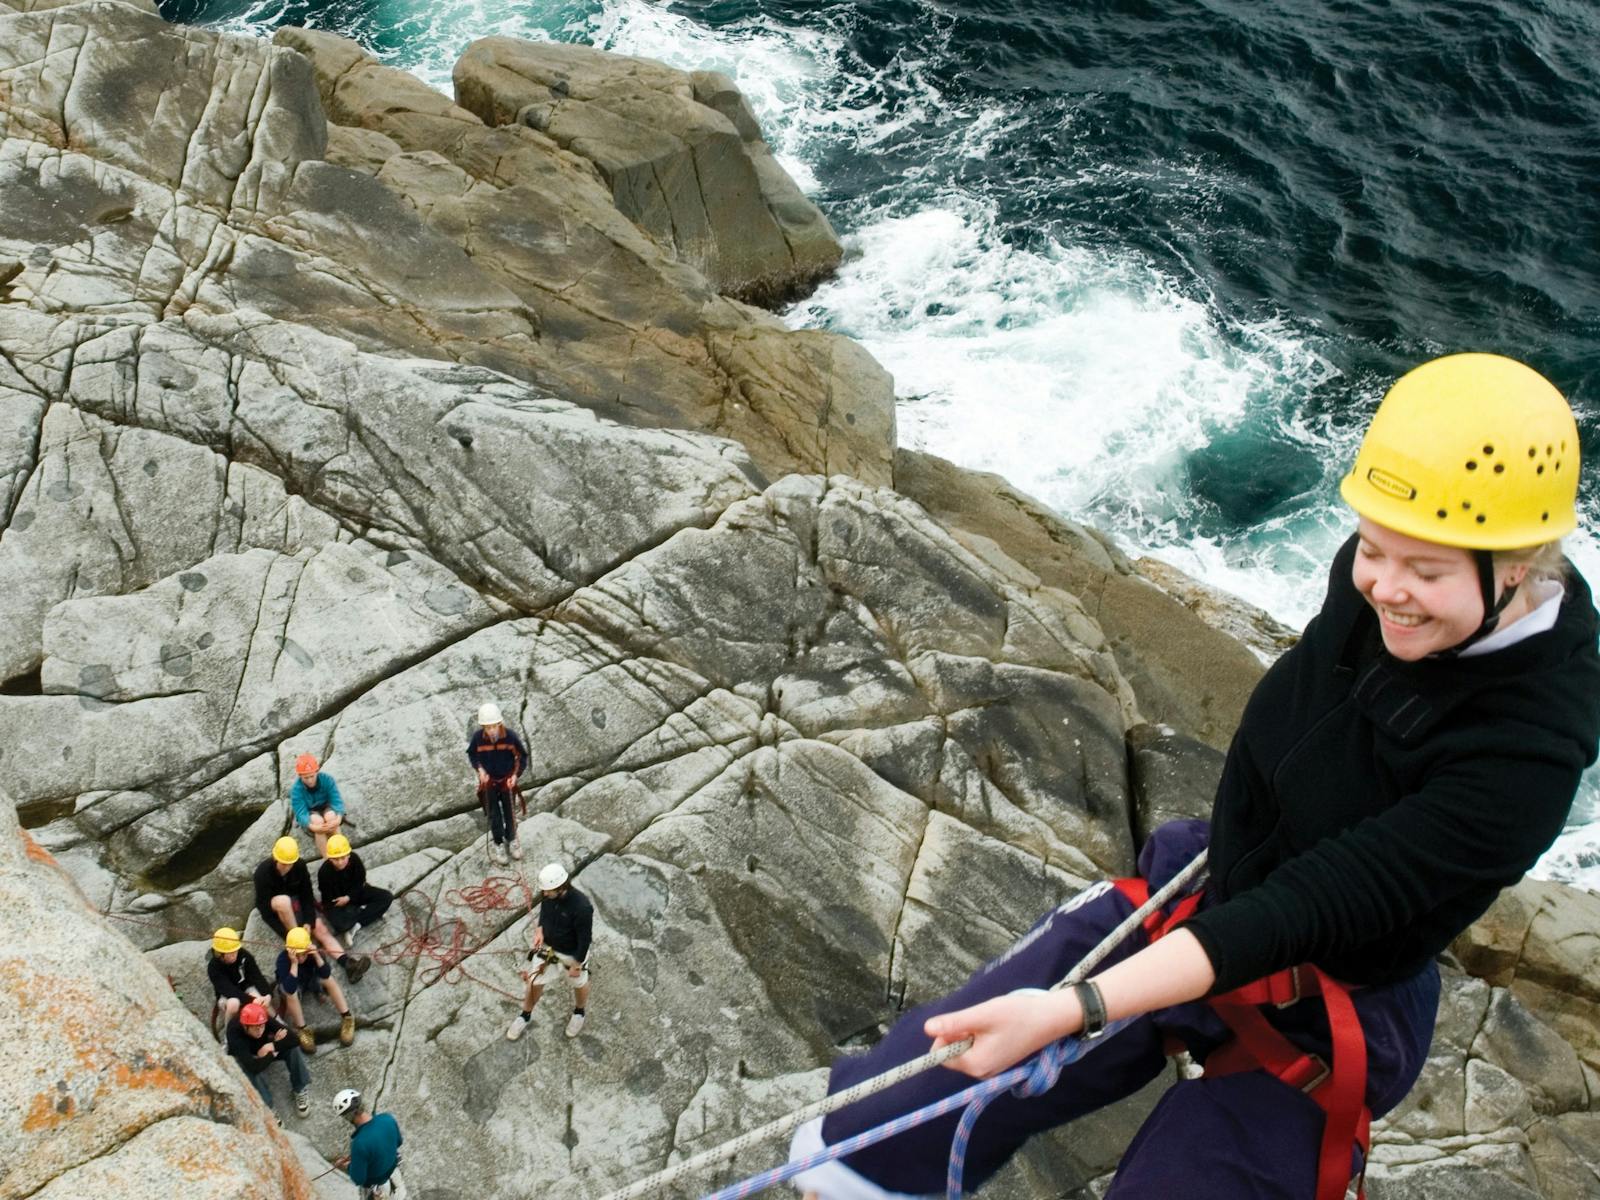 A woman abseils down a rocky cliff by the sea. A group of abseilers sit on the rocks below.